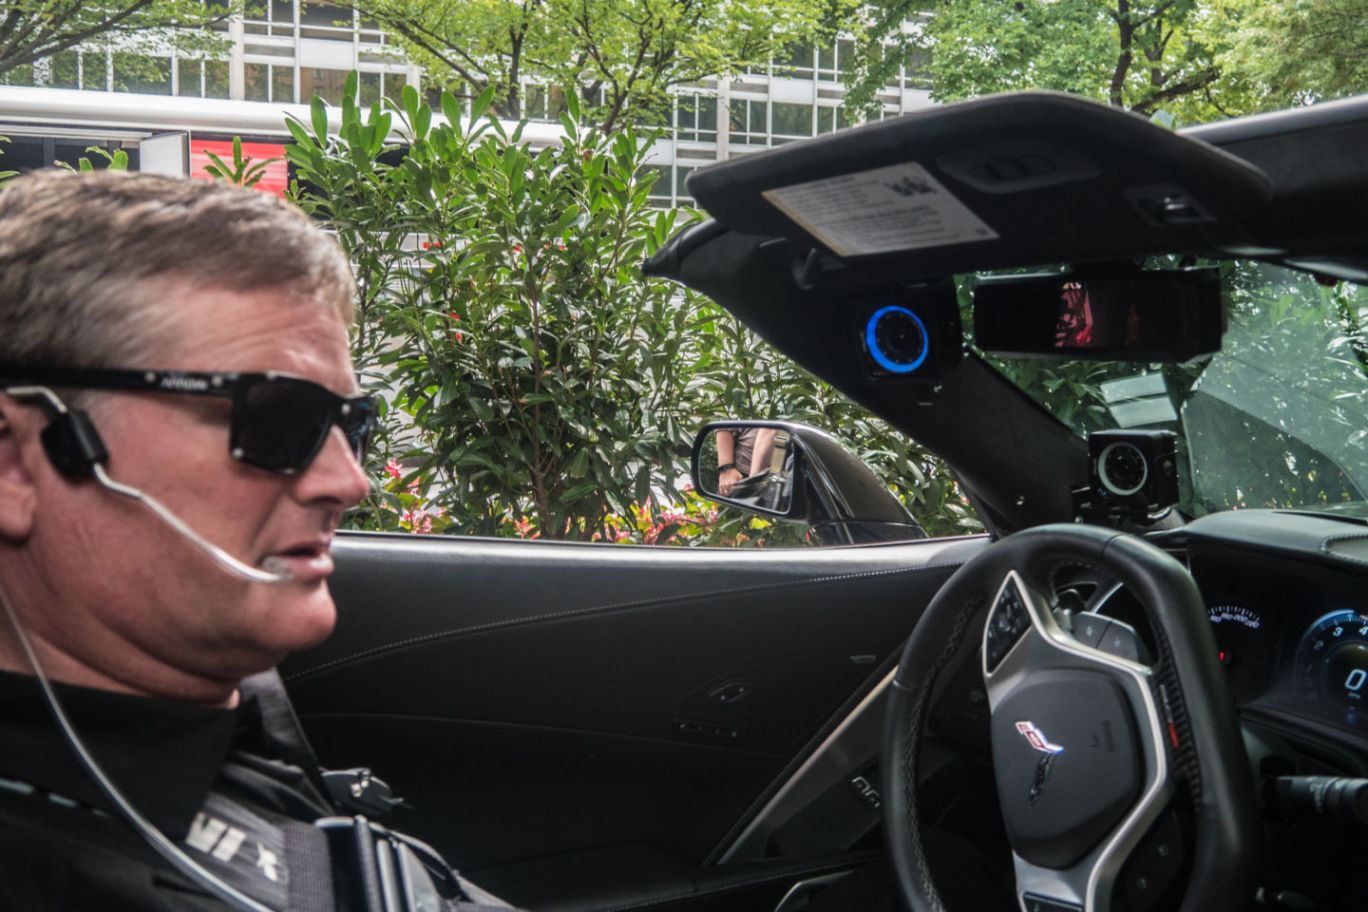 Sam Schmidt sits in driver seat of his convertible corvette wearing specialized sunglasses and a headset that control his vehicle